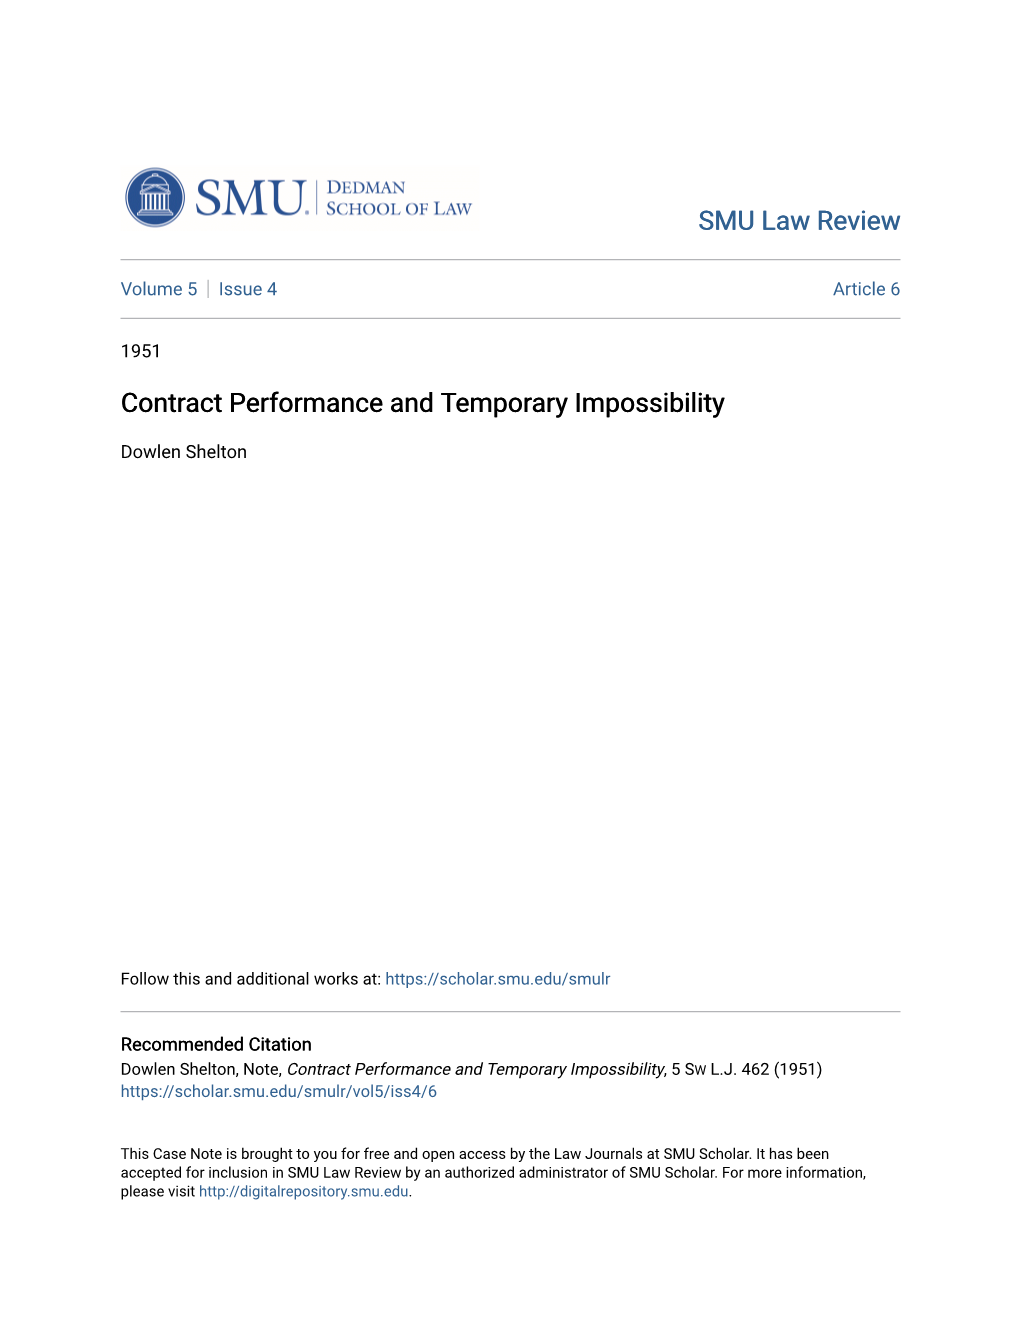 Contract Performance and Temporary Impossibility